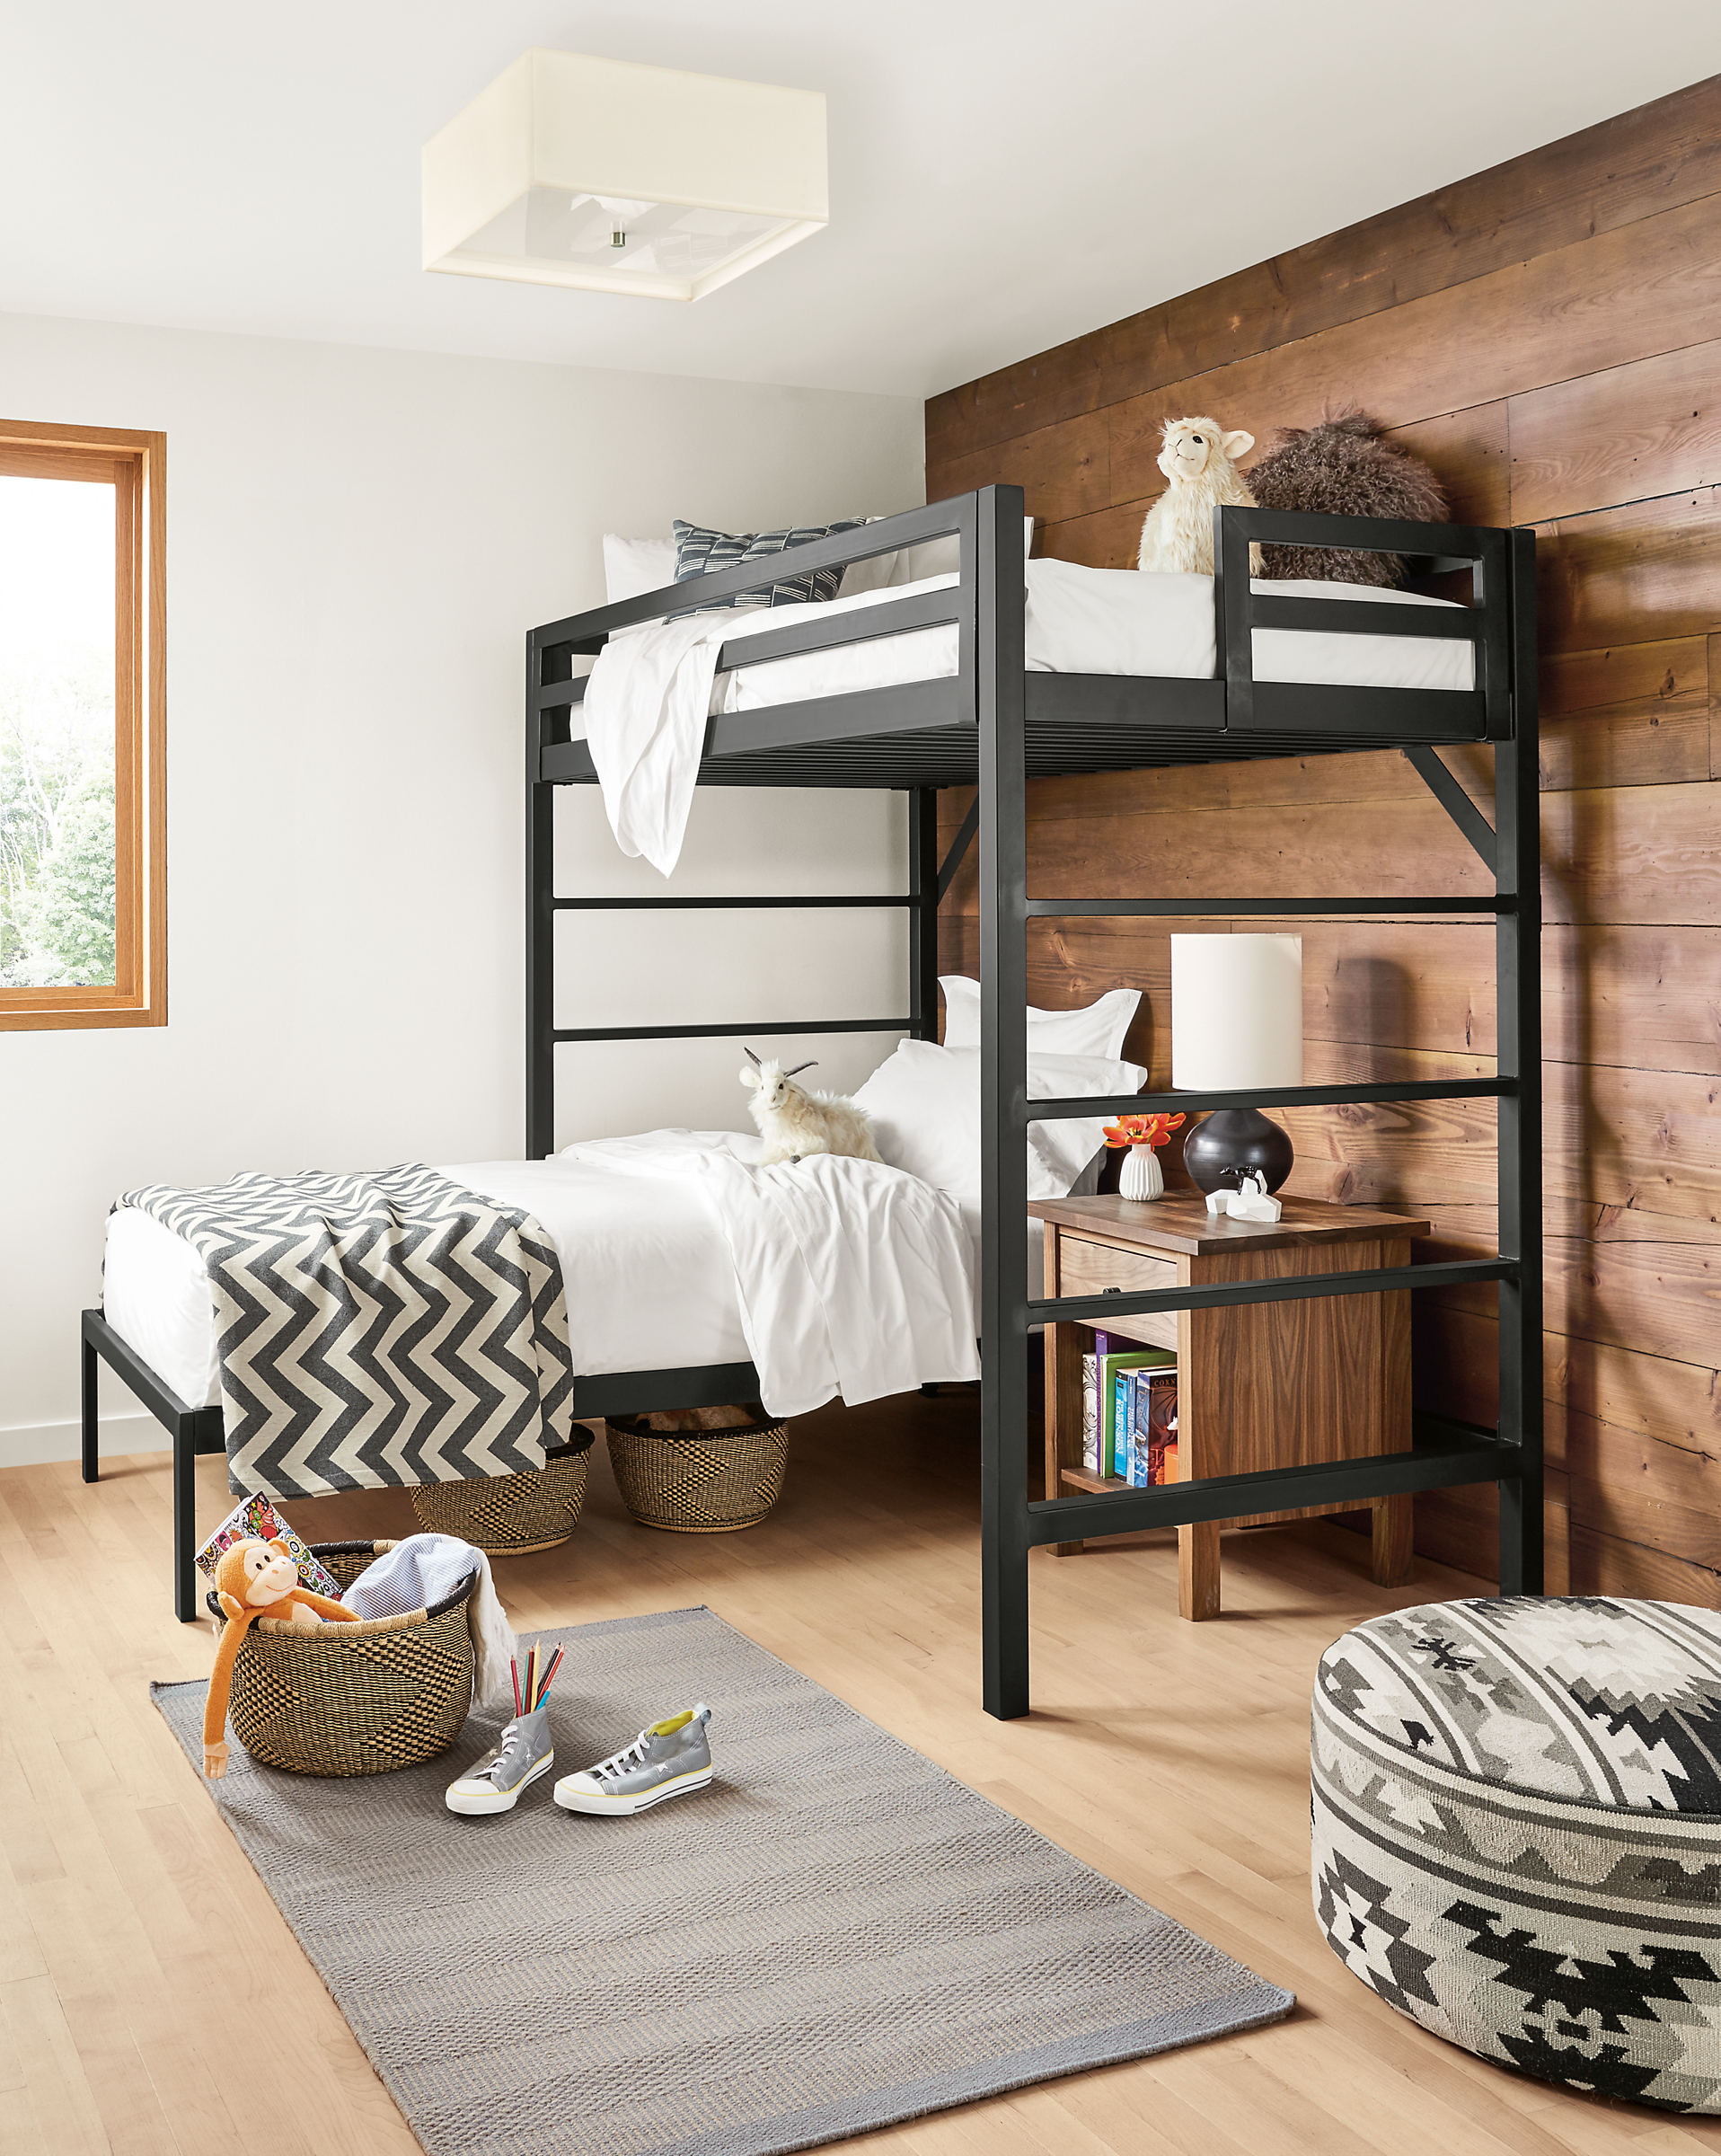 Chase loft bed and Core platform bed in kid room.